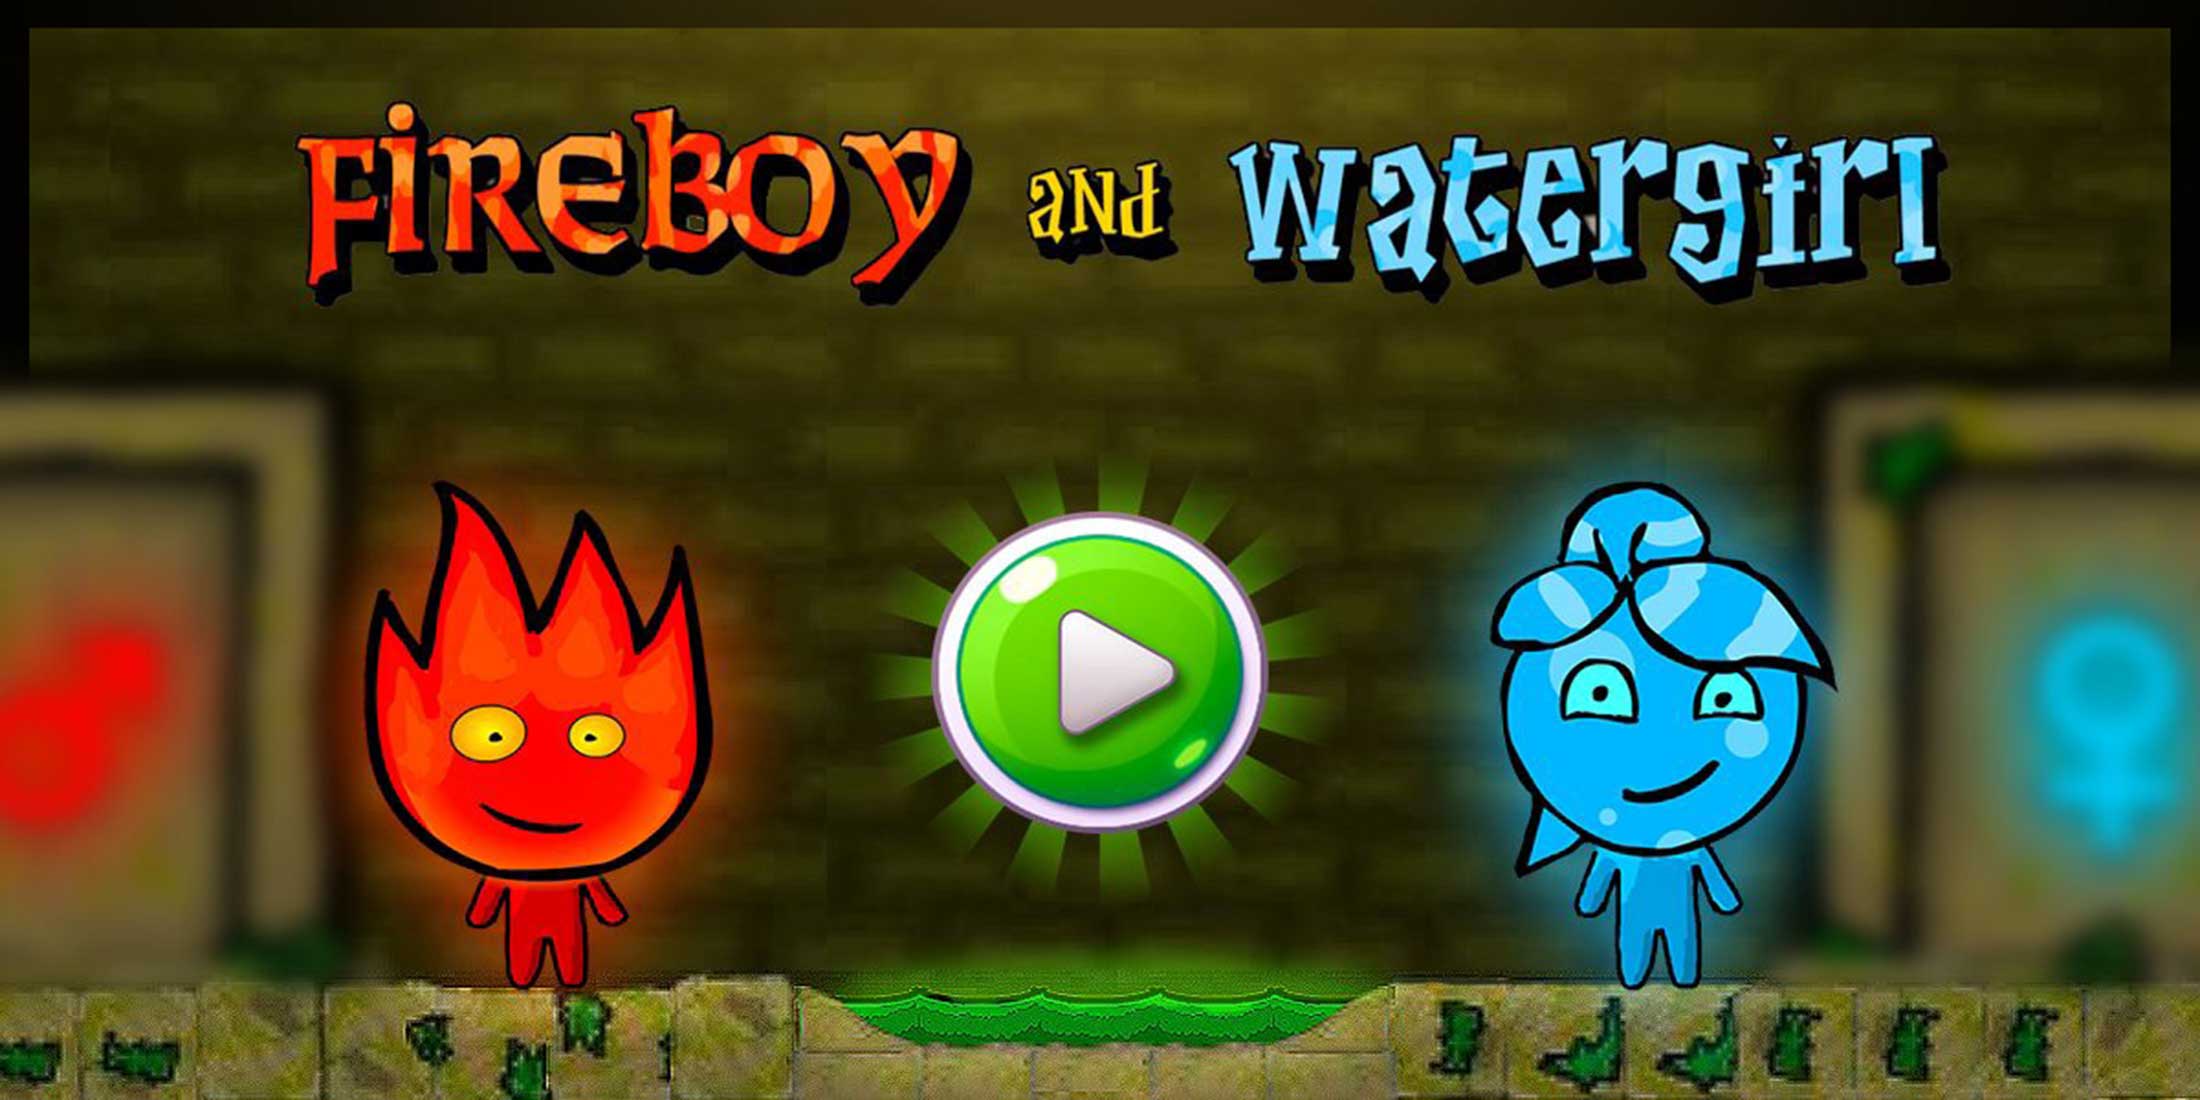 Fireboy & Watergirl 2 in The Light Temple